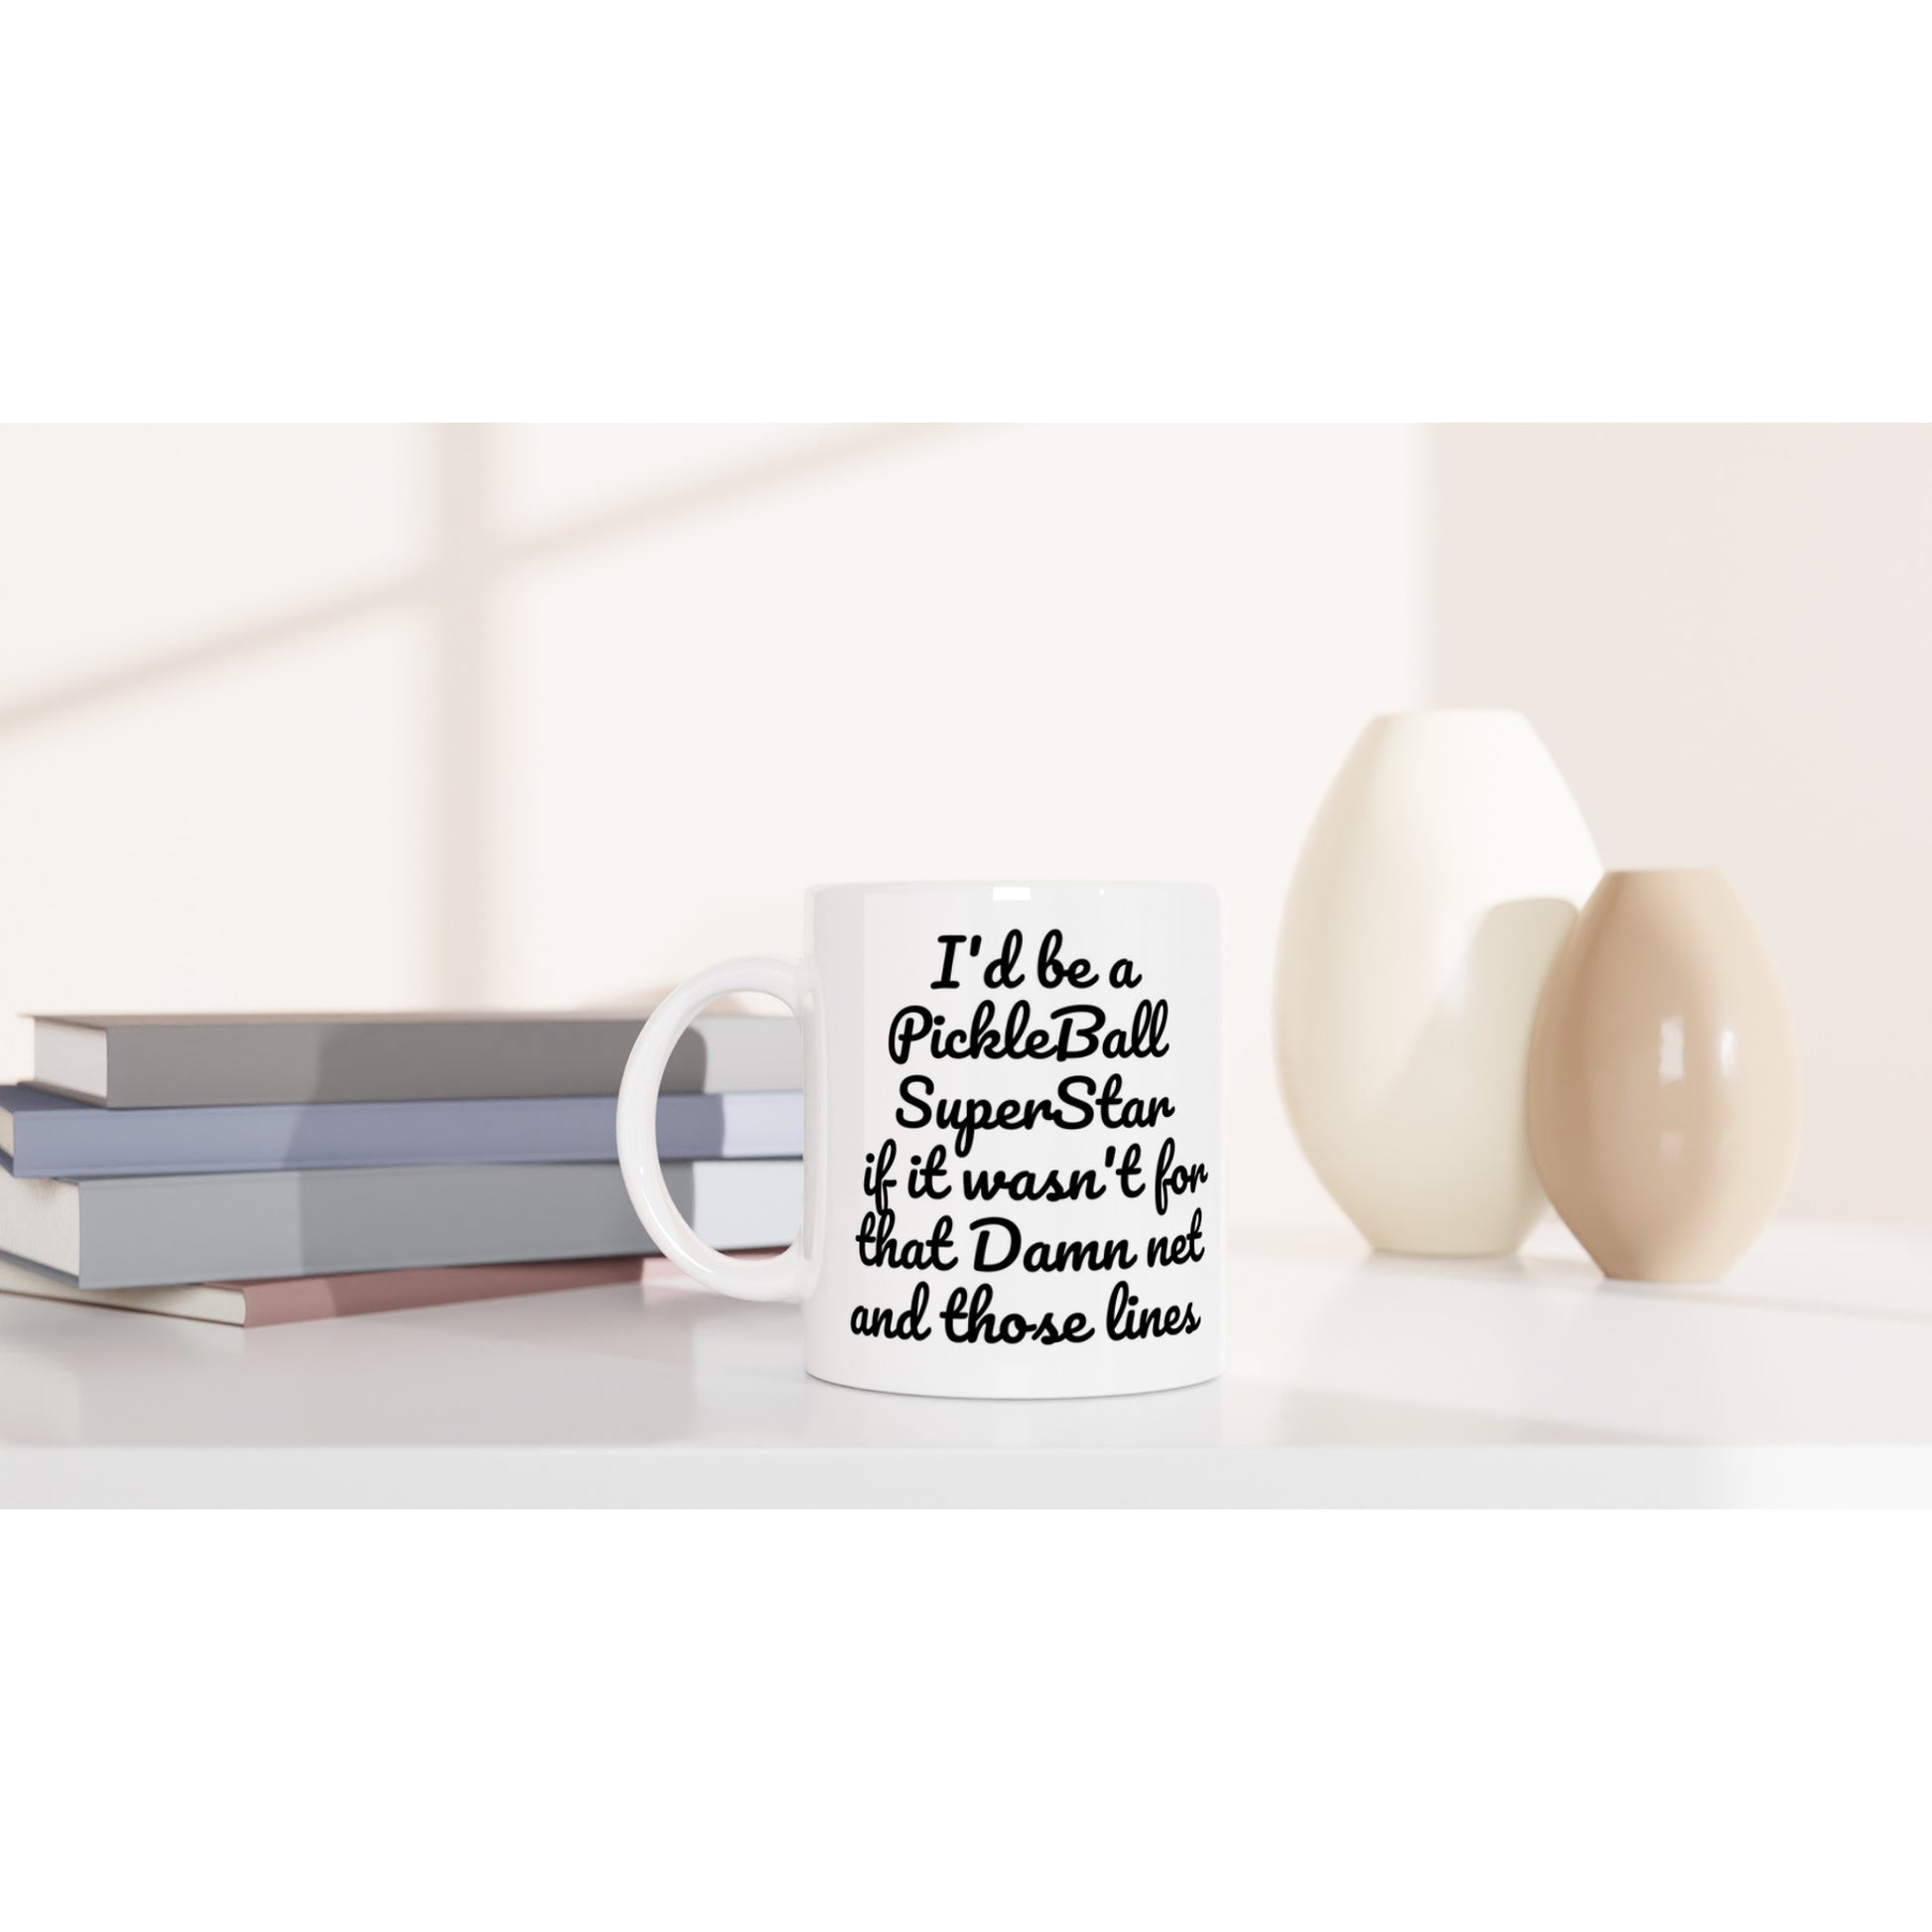 I'd be a PickleBall SuperStar if it wasn't for that Damn net and those lines Pickleball 11oz white ceramic mug and coffee mug is dishwasher safe and microwave safe sitting on table with books and vases.